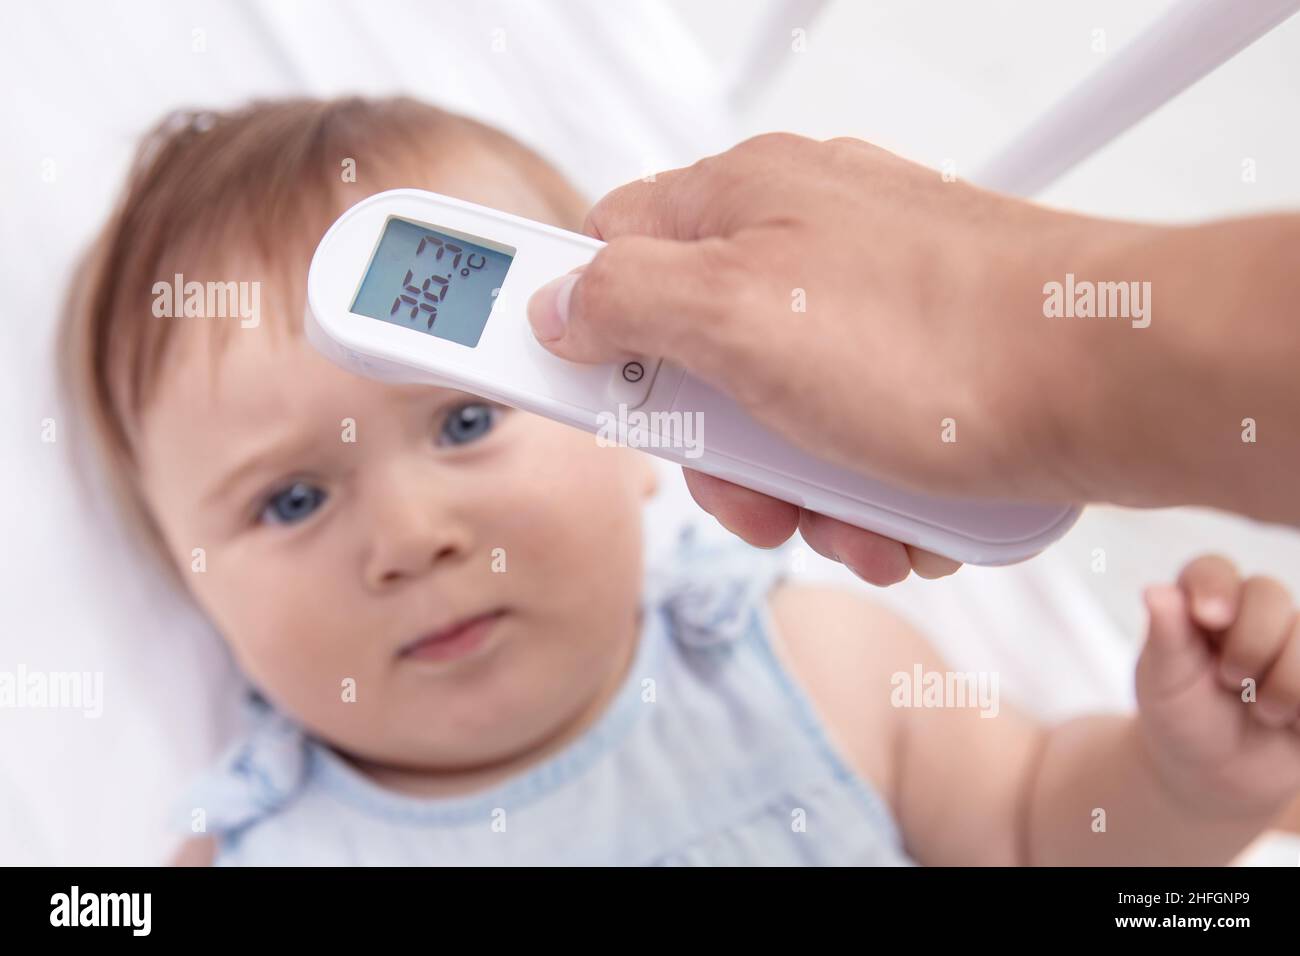 Mother checks baby's  temperature with modern electronic termomether at baby's forehead Stock Photo